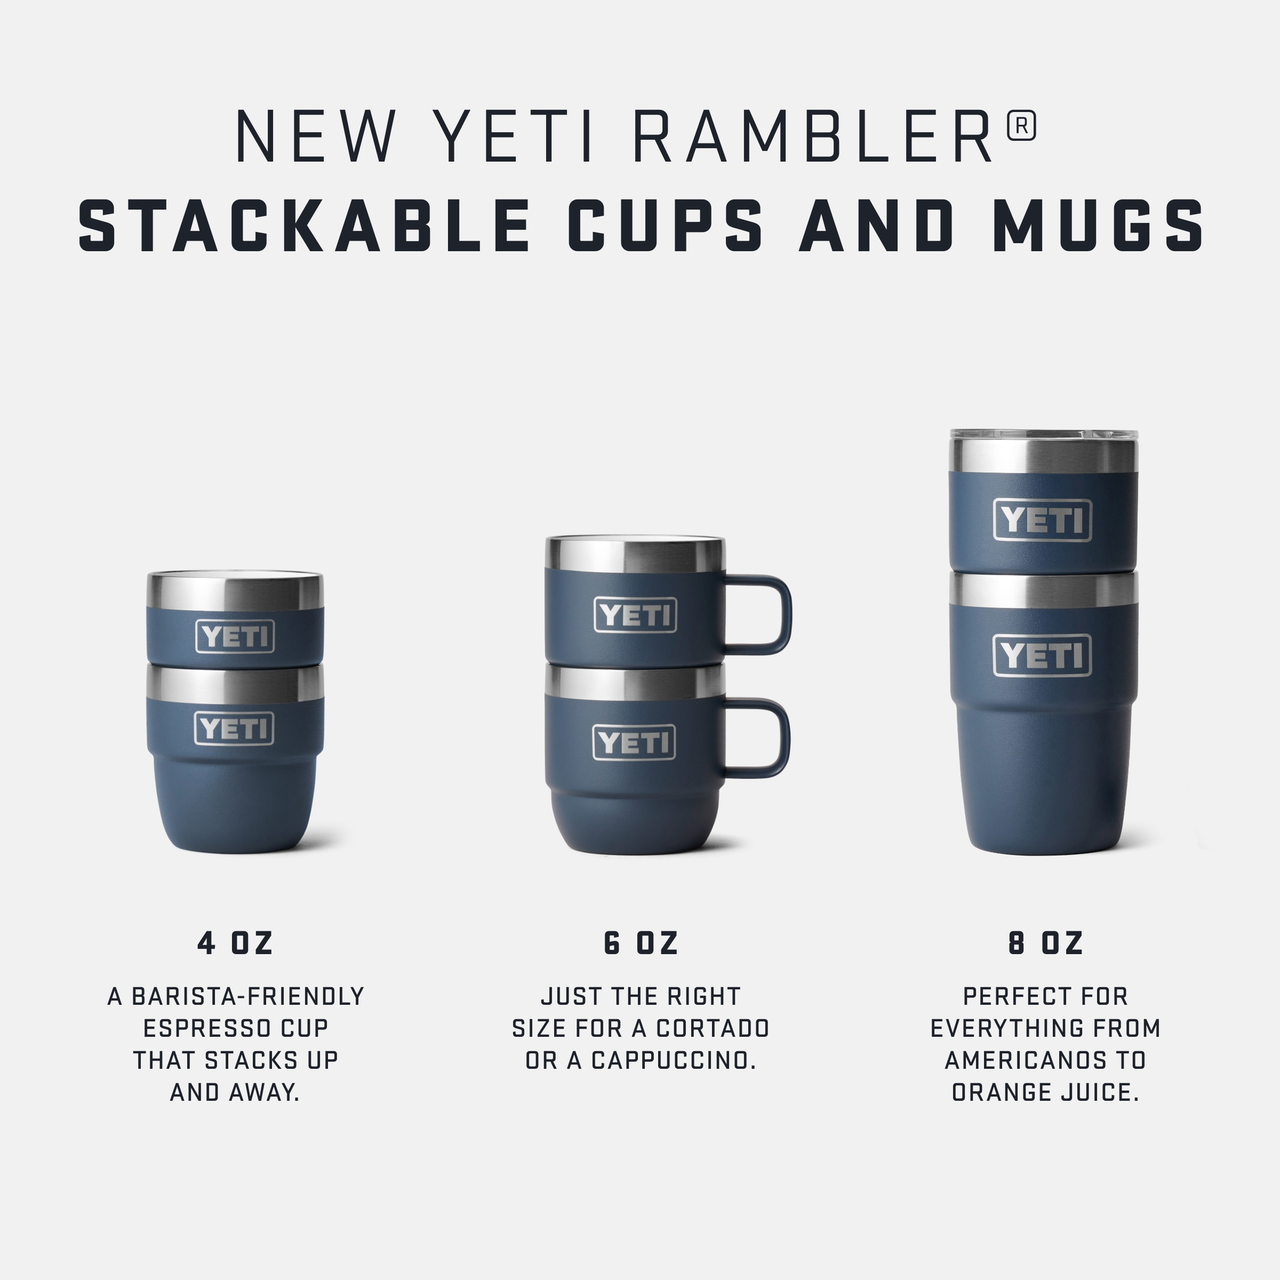 https://cdn11.bigcommerce.com/s-kk2jd0cxqh/images/stencil/1280x1280/products/18884/26296/yeti-yeti-rambler-4-oz-cup-2-pack-rescue-red__46919.1699095260.png?c=1